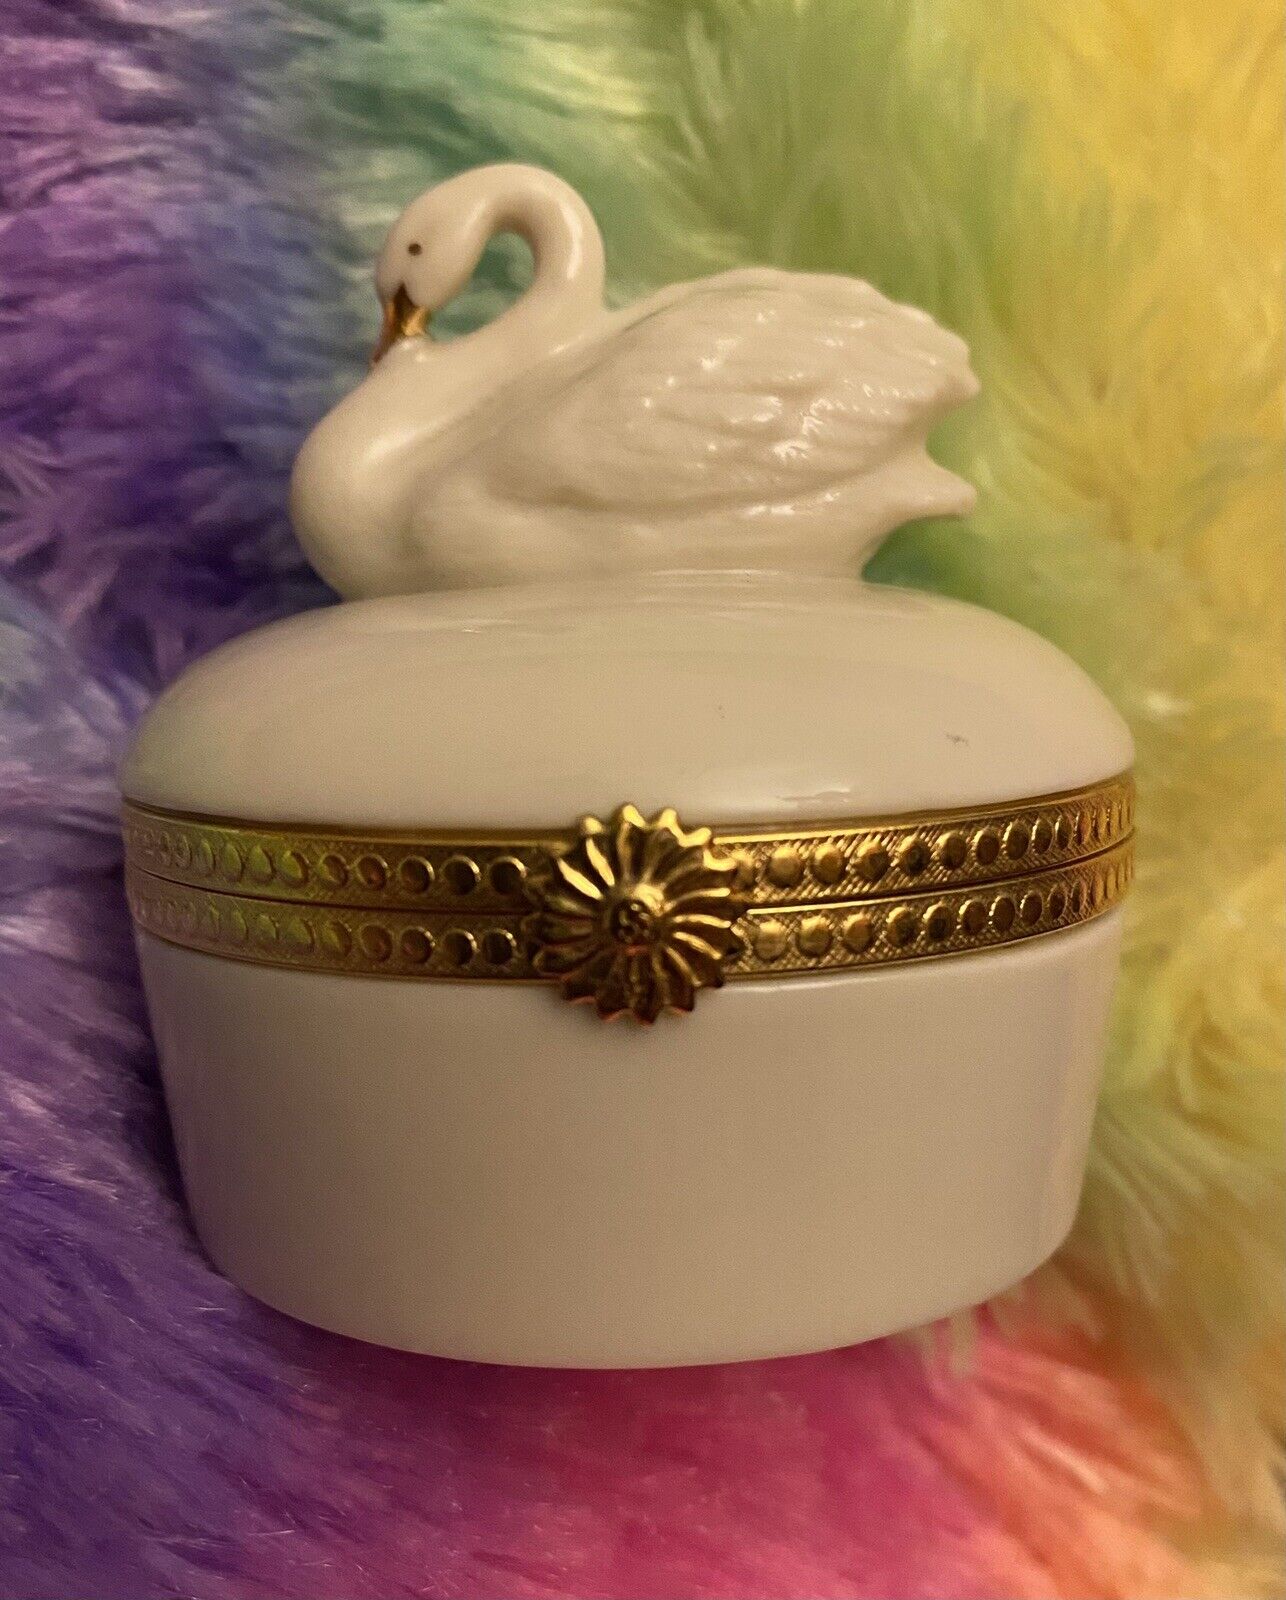 Lenox Hinged Swan Figurine Trinket Box *new without tags or original box*